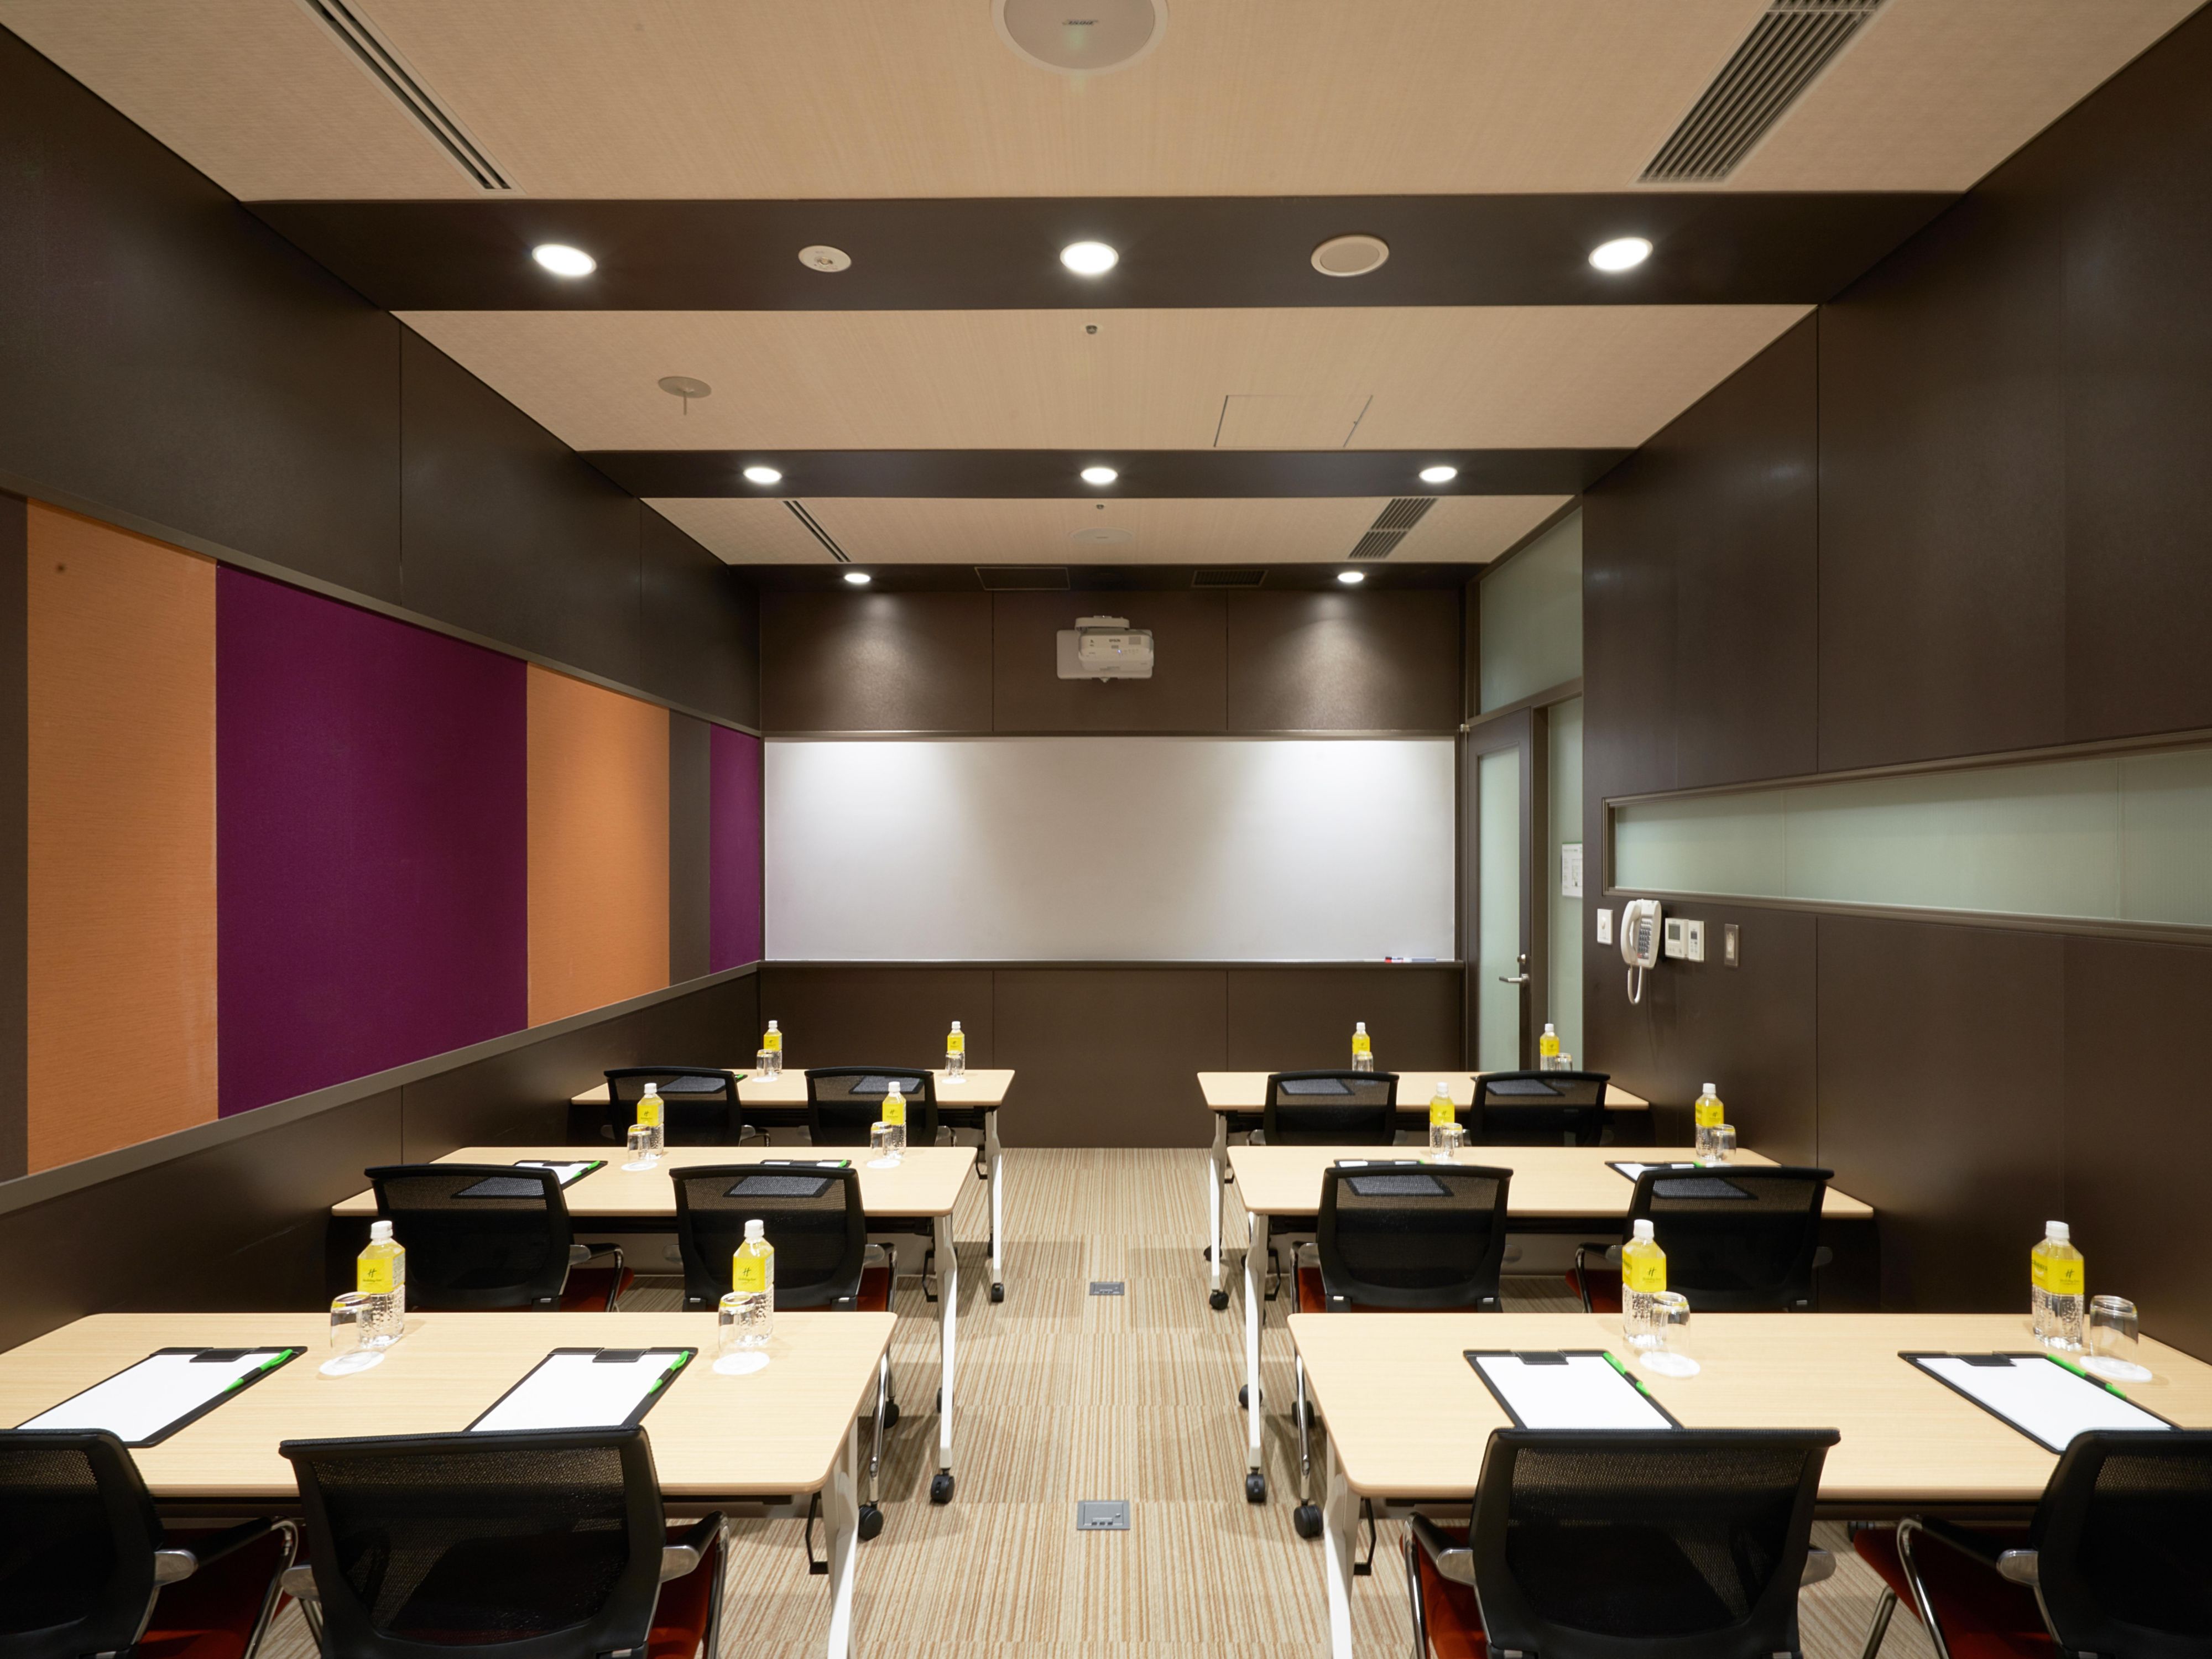 Meeting Room: With a large modern meeting room with the latest equipment that can be partitioned into two smaller meeting rooms, we are able to accommodate a range of meetings. From large board meetings or presentations to small informal groups or 1: 1s.
 ・Meeting room＃1 25㎡ – seats12　　　 　
 ・Meeting room＃2 25㎡ – seats12　　　　
 ・Meeting room ＃1&2